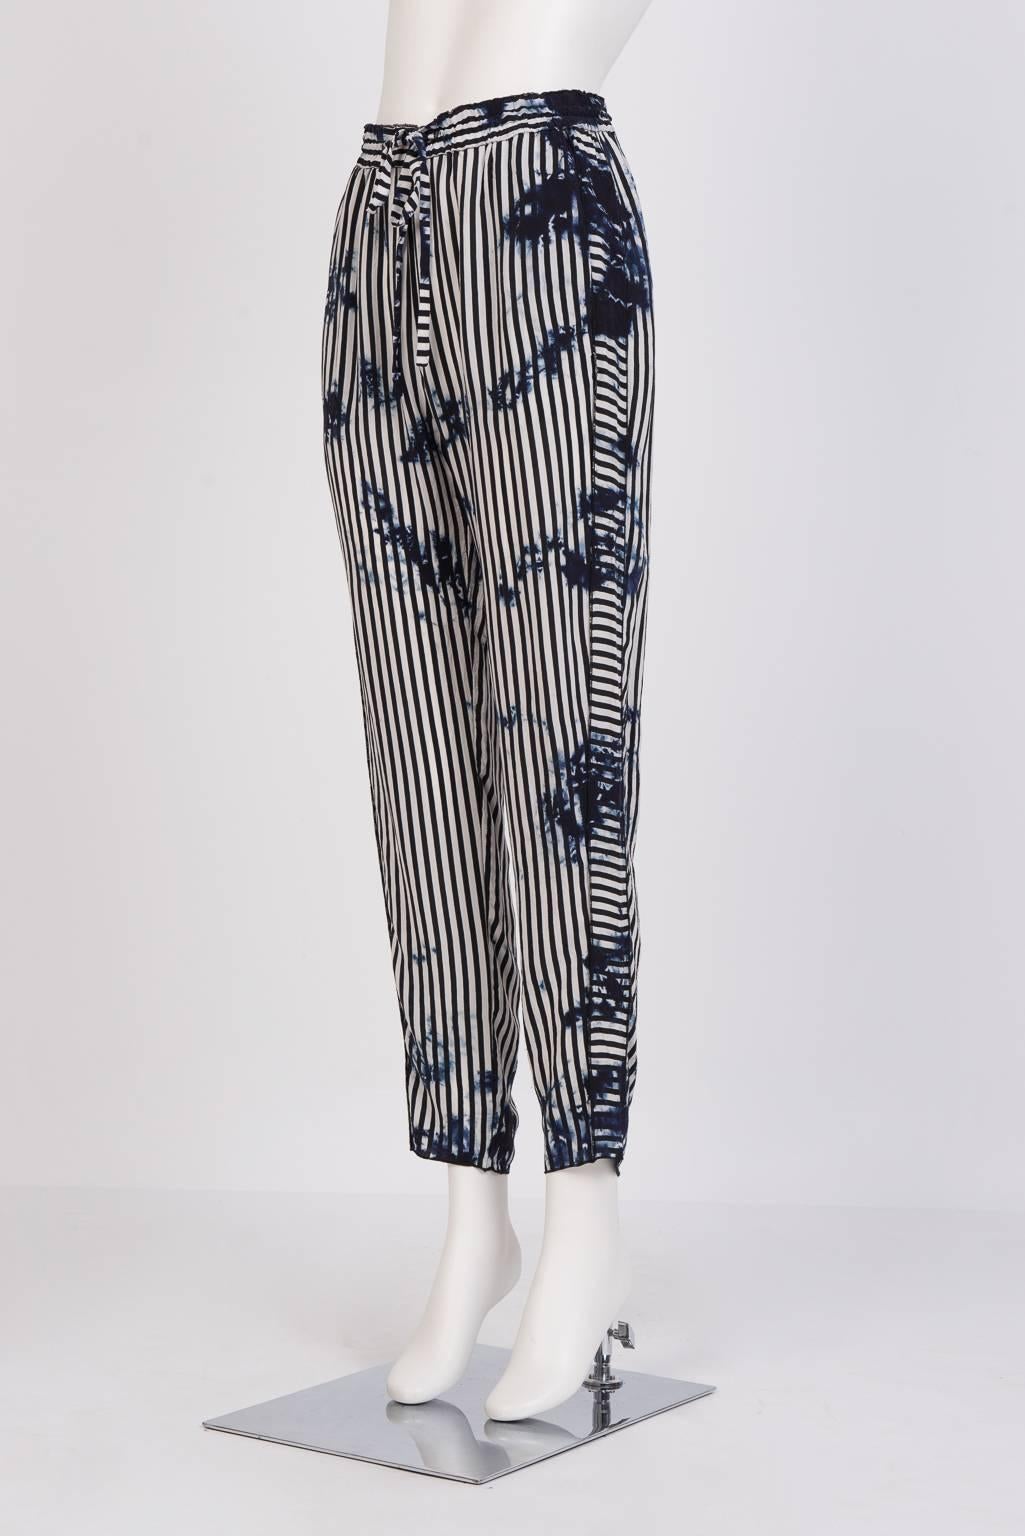 Hand made in Los Angeles lightwieght drawstring trousers with a play on tie-dyed black & white stripes in opposite directions